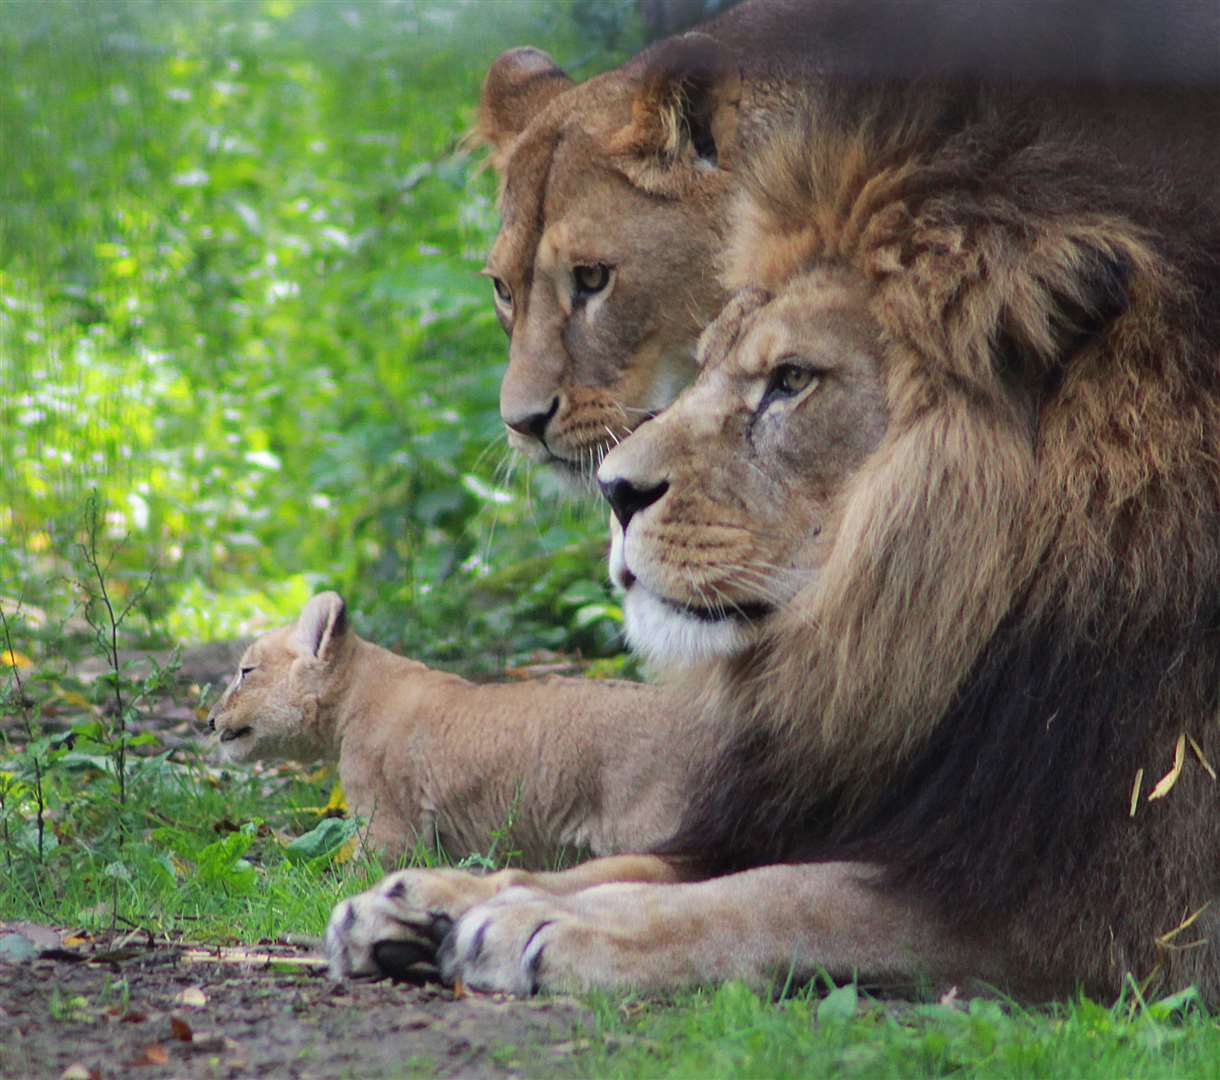 Adras and Oudrika, with one of their cubs